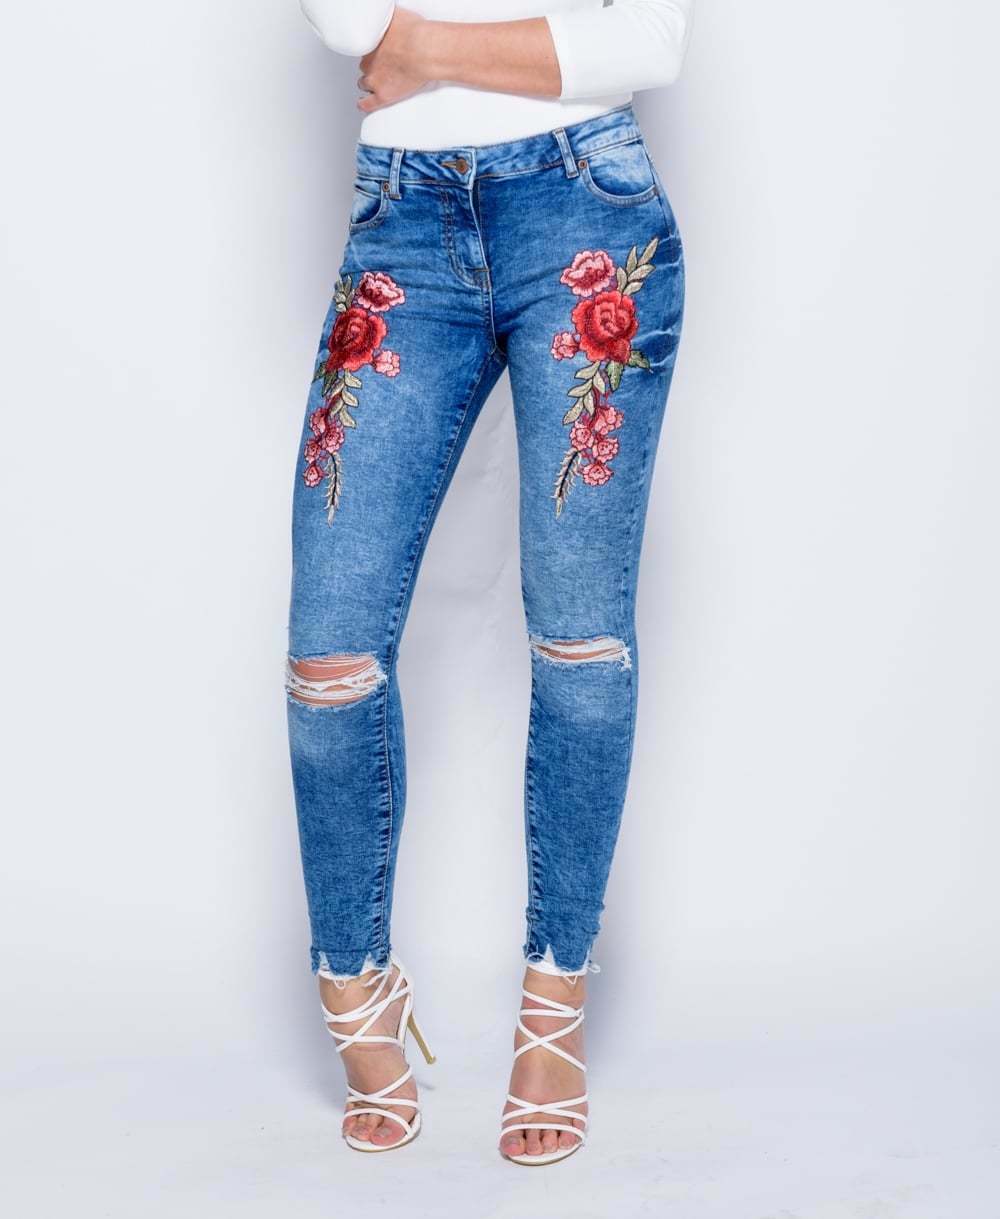 women's light blue floral ripped jeans with embroidery - embroidered